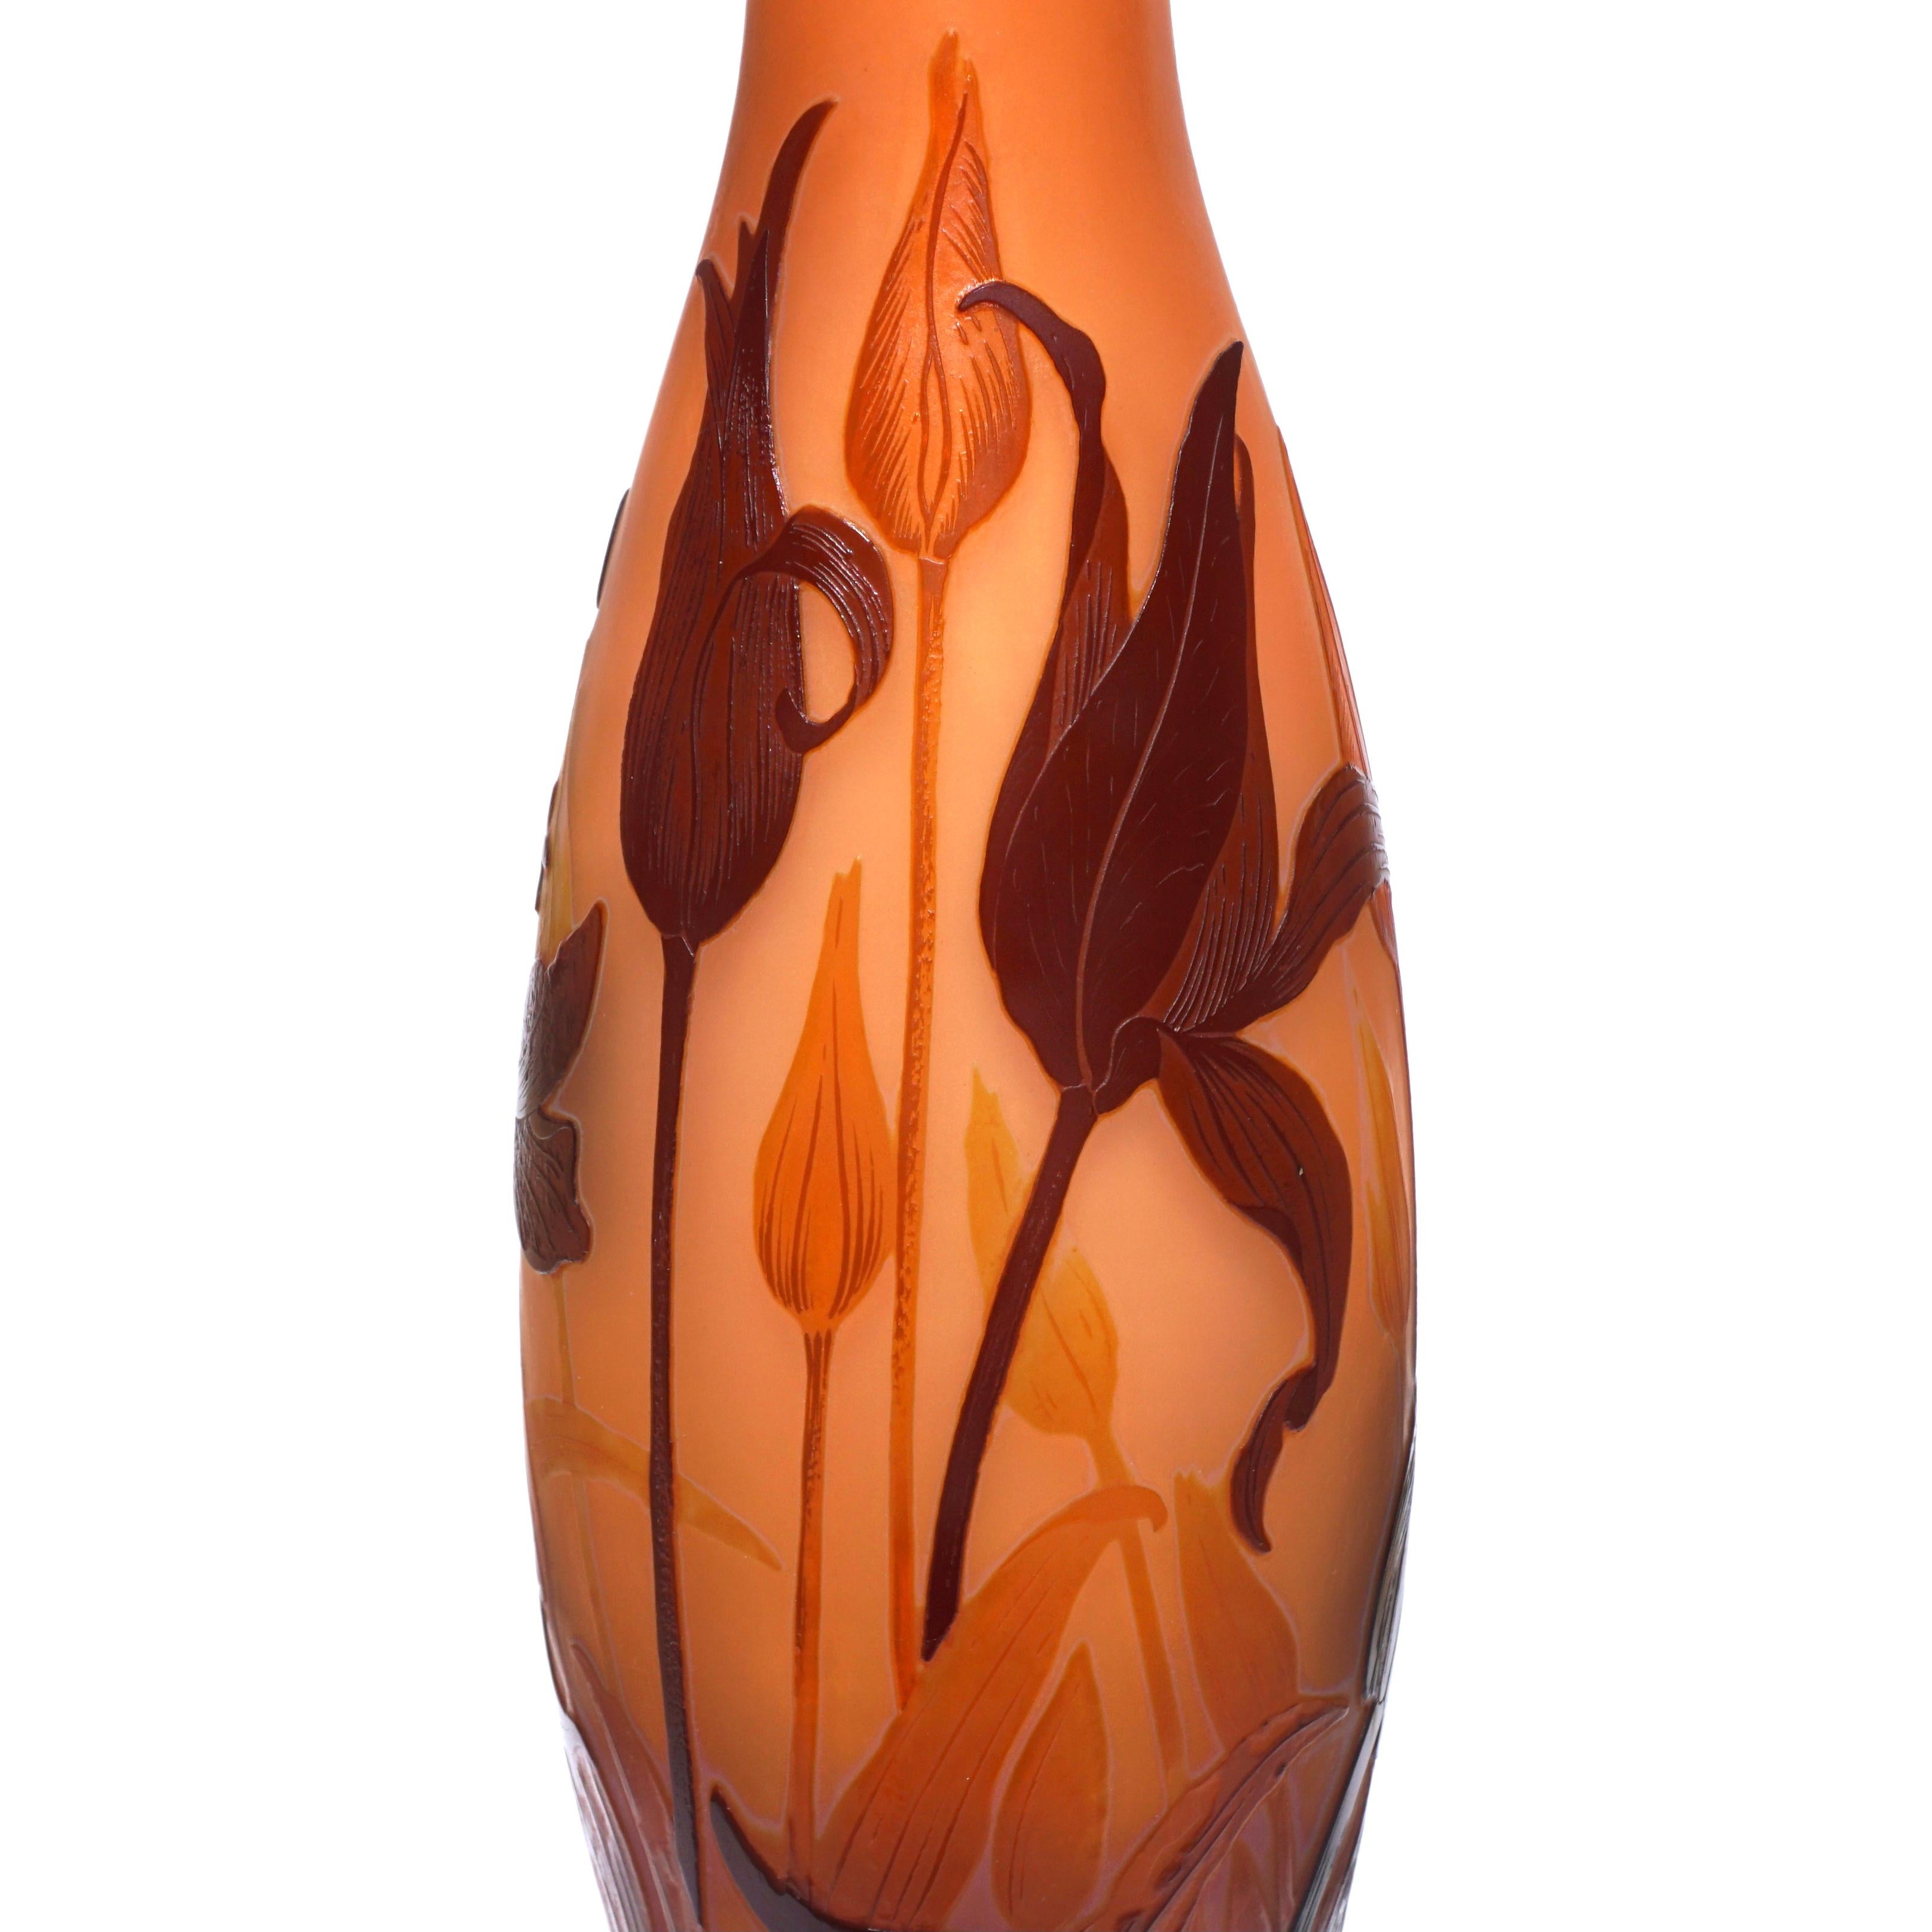 French Tall Emile Galle Lily Pedestaled Vase For Sale